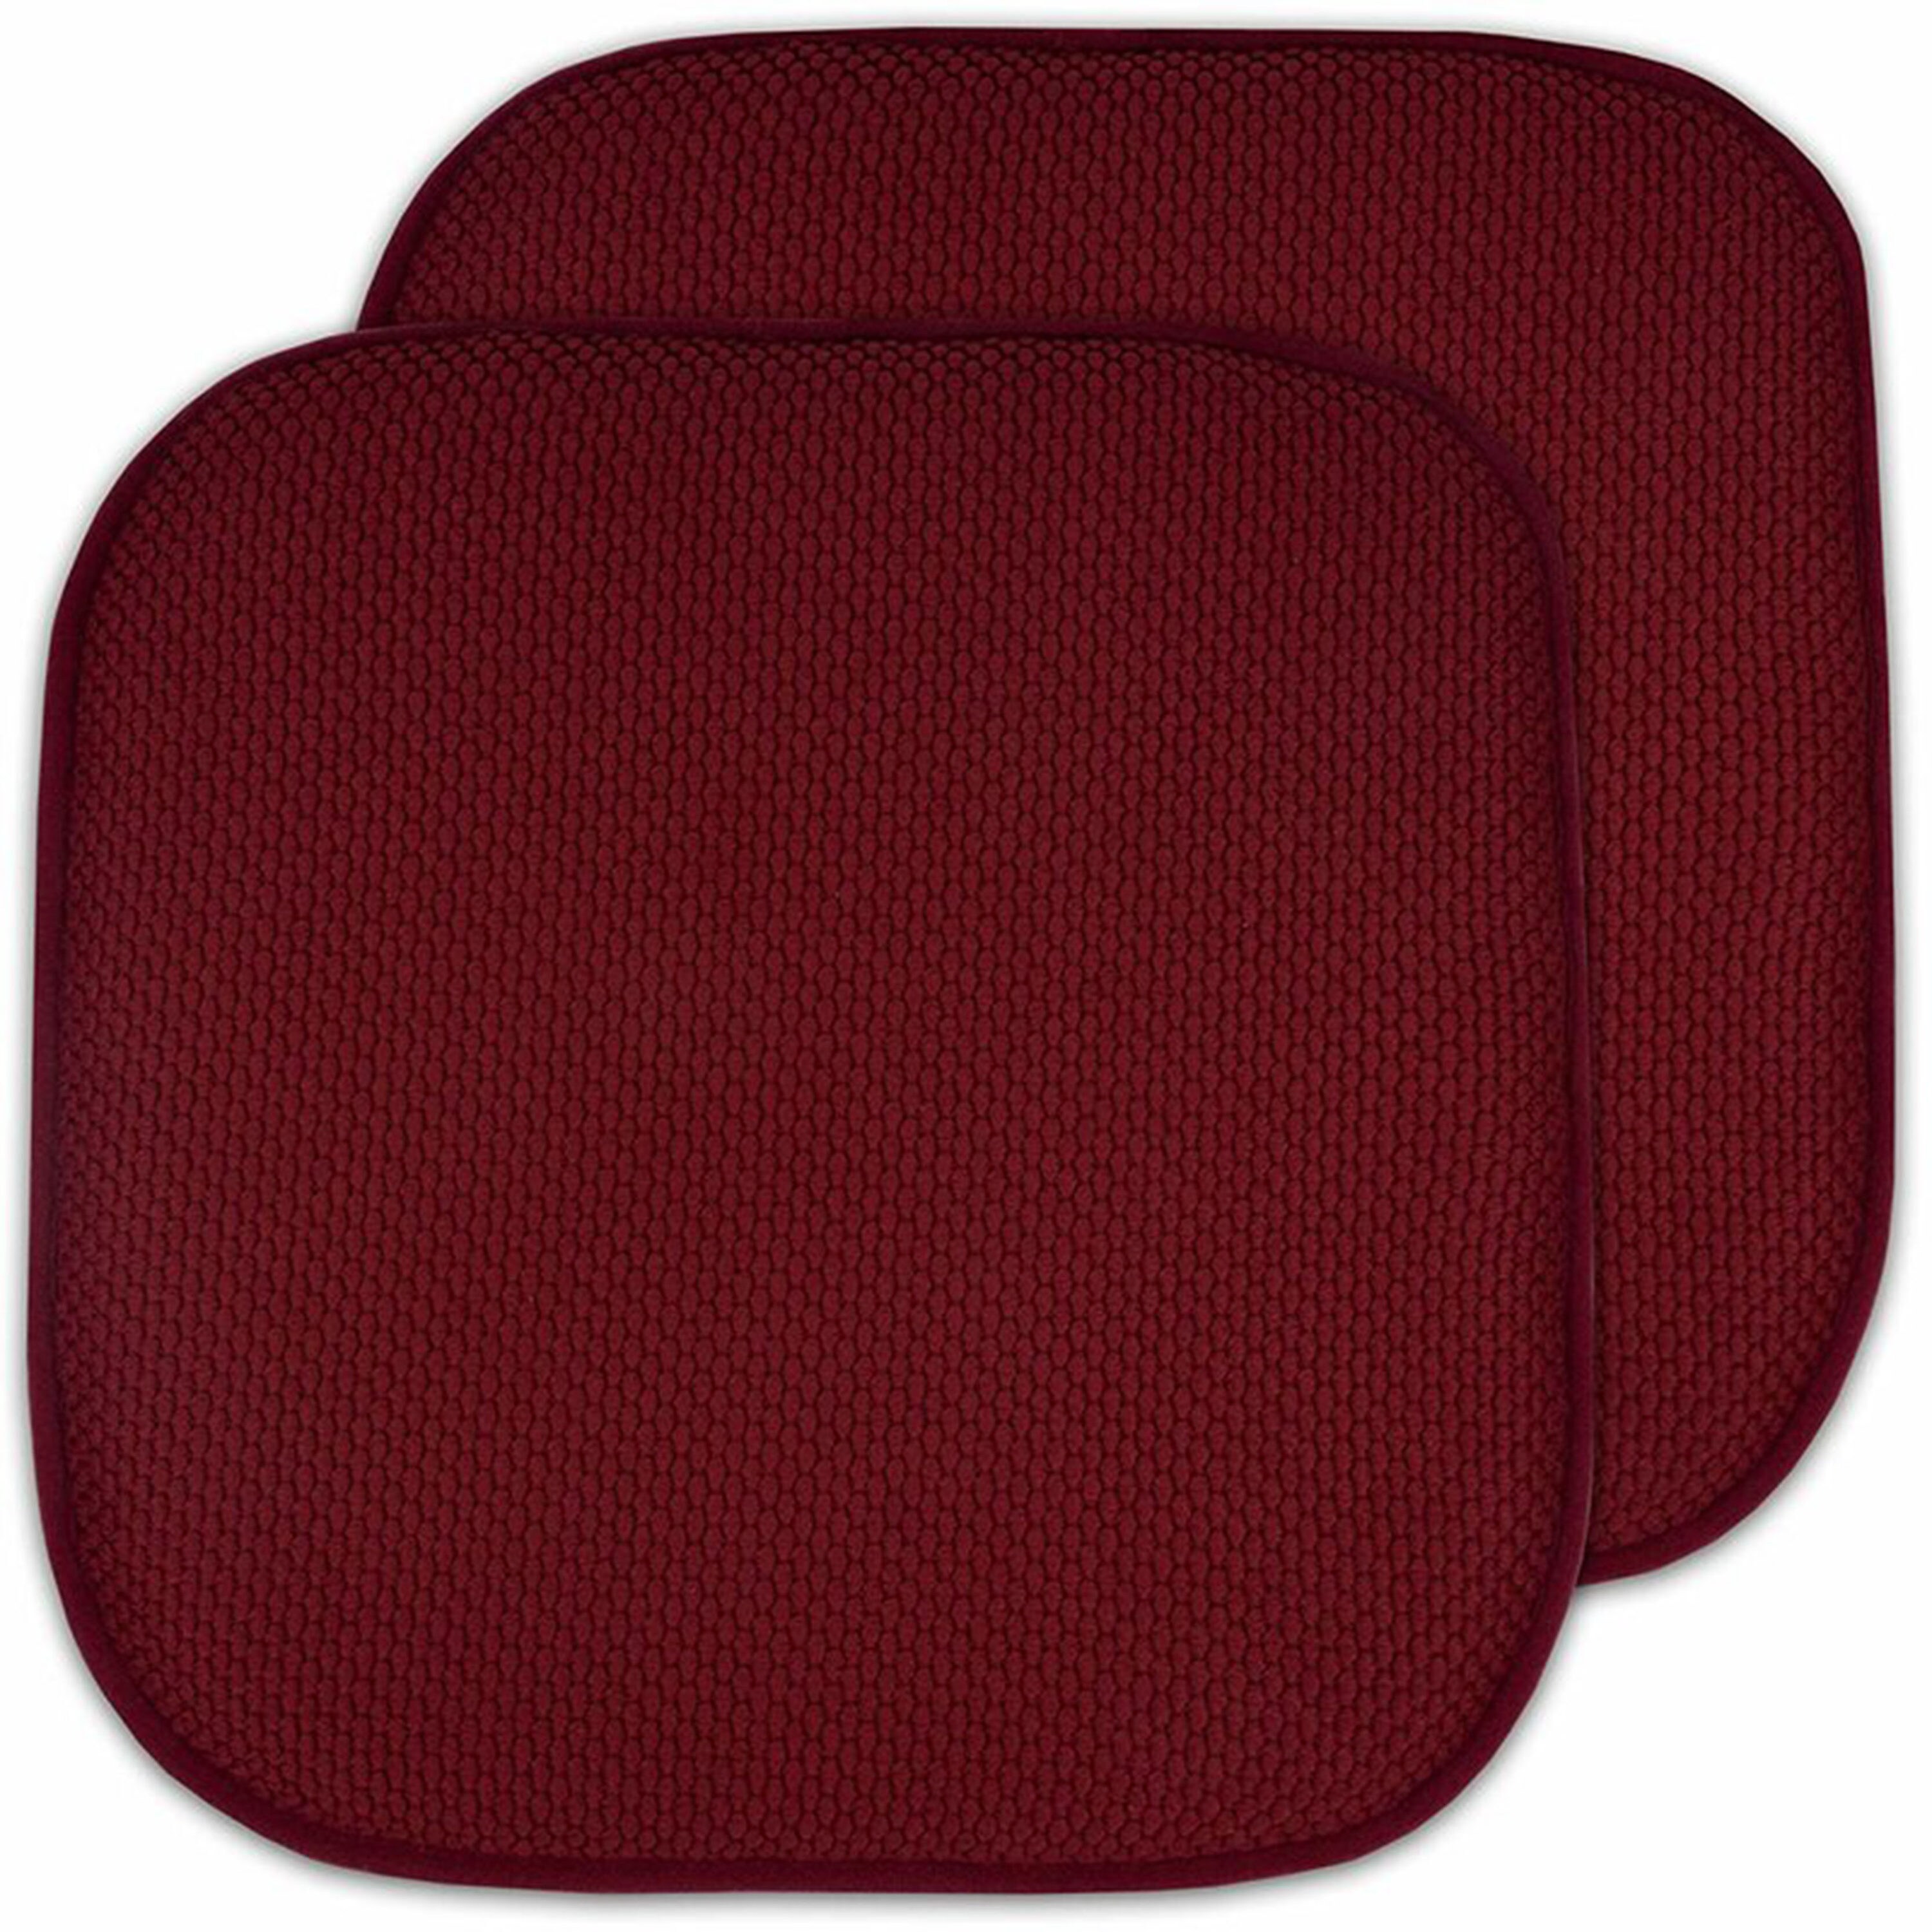 Burgundy Indoor Chair Cushions at Lowes.com